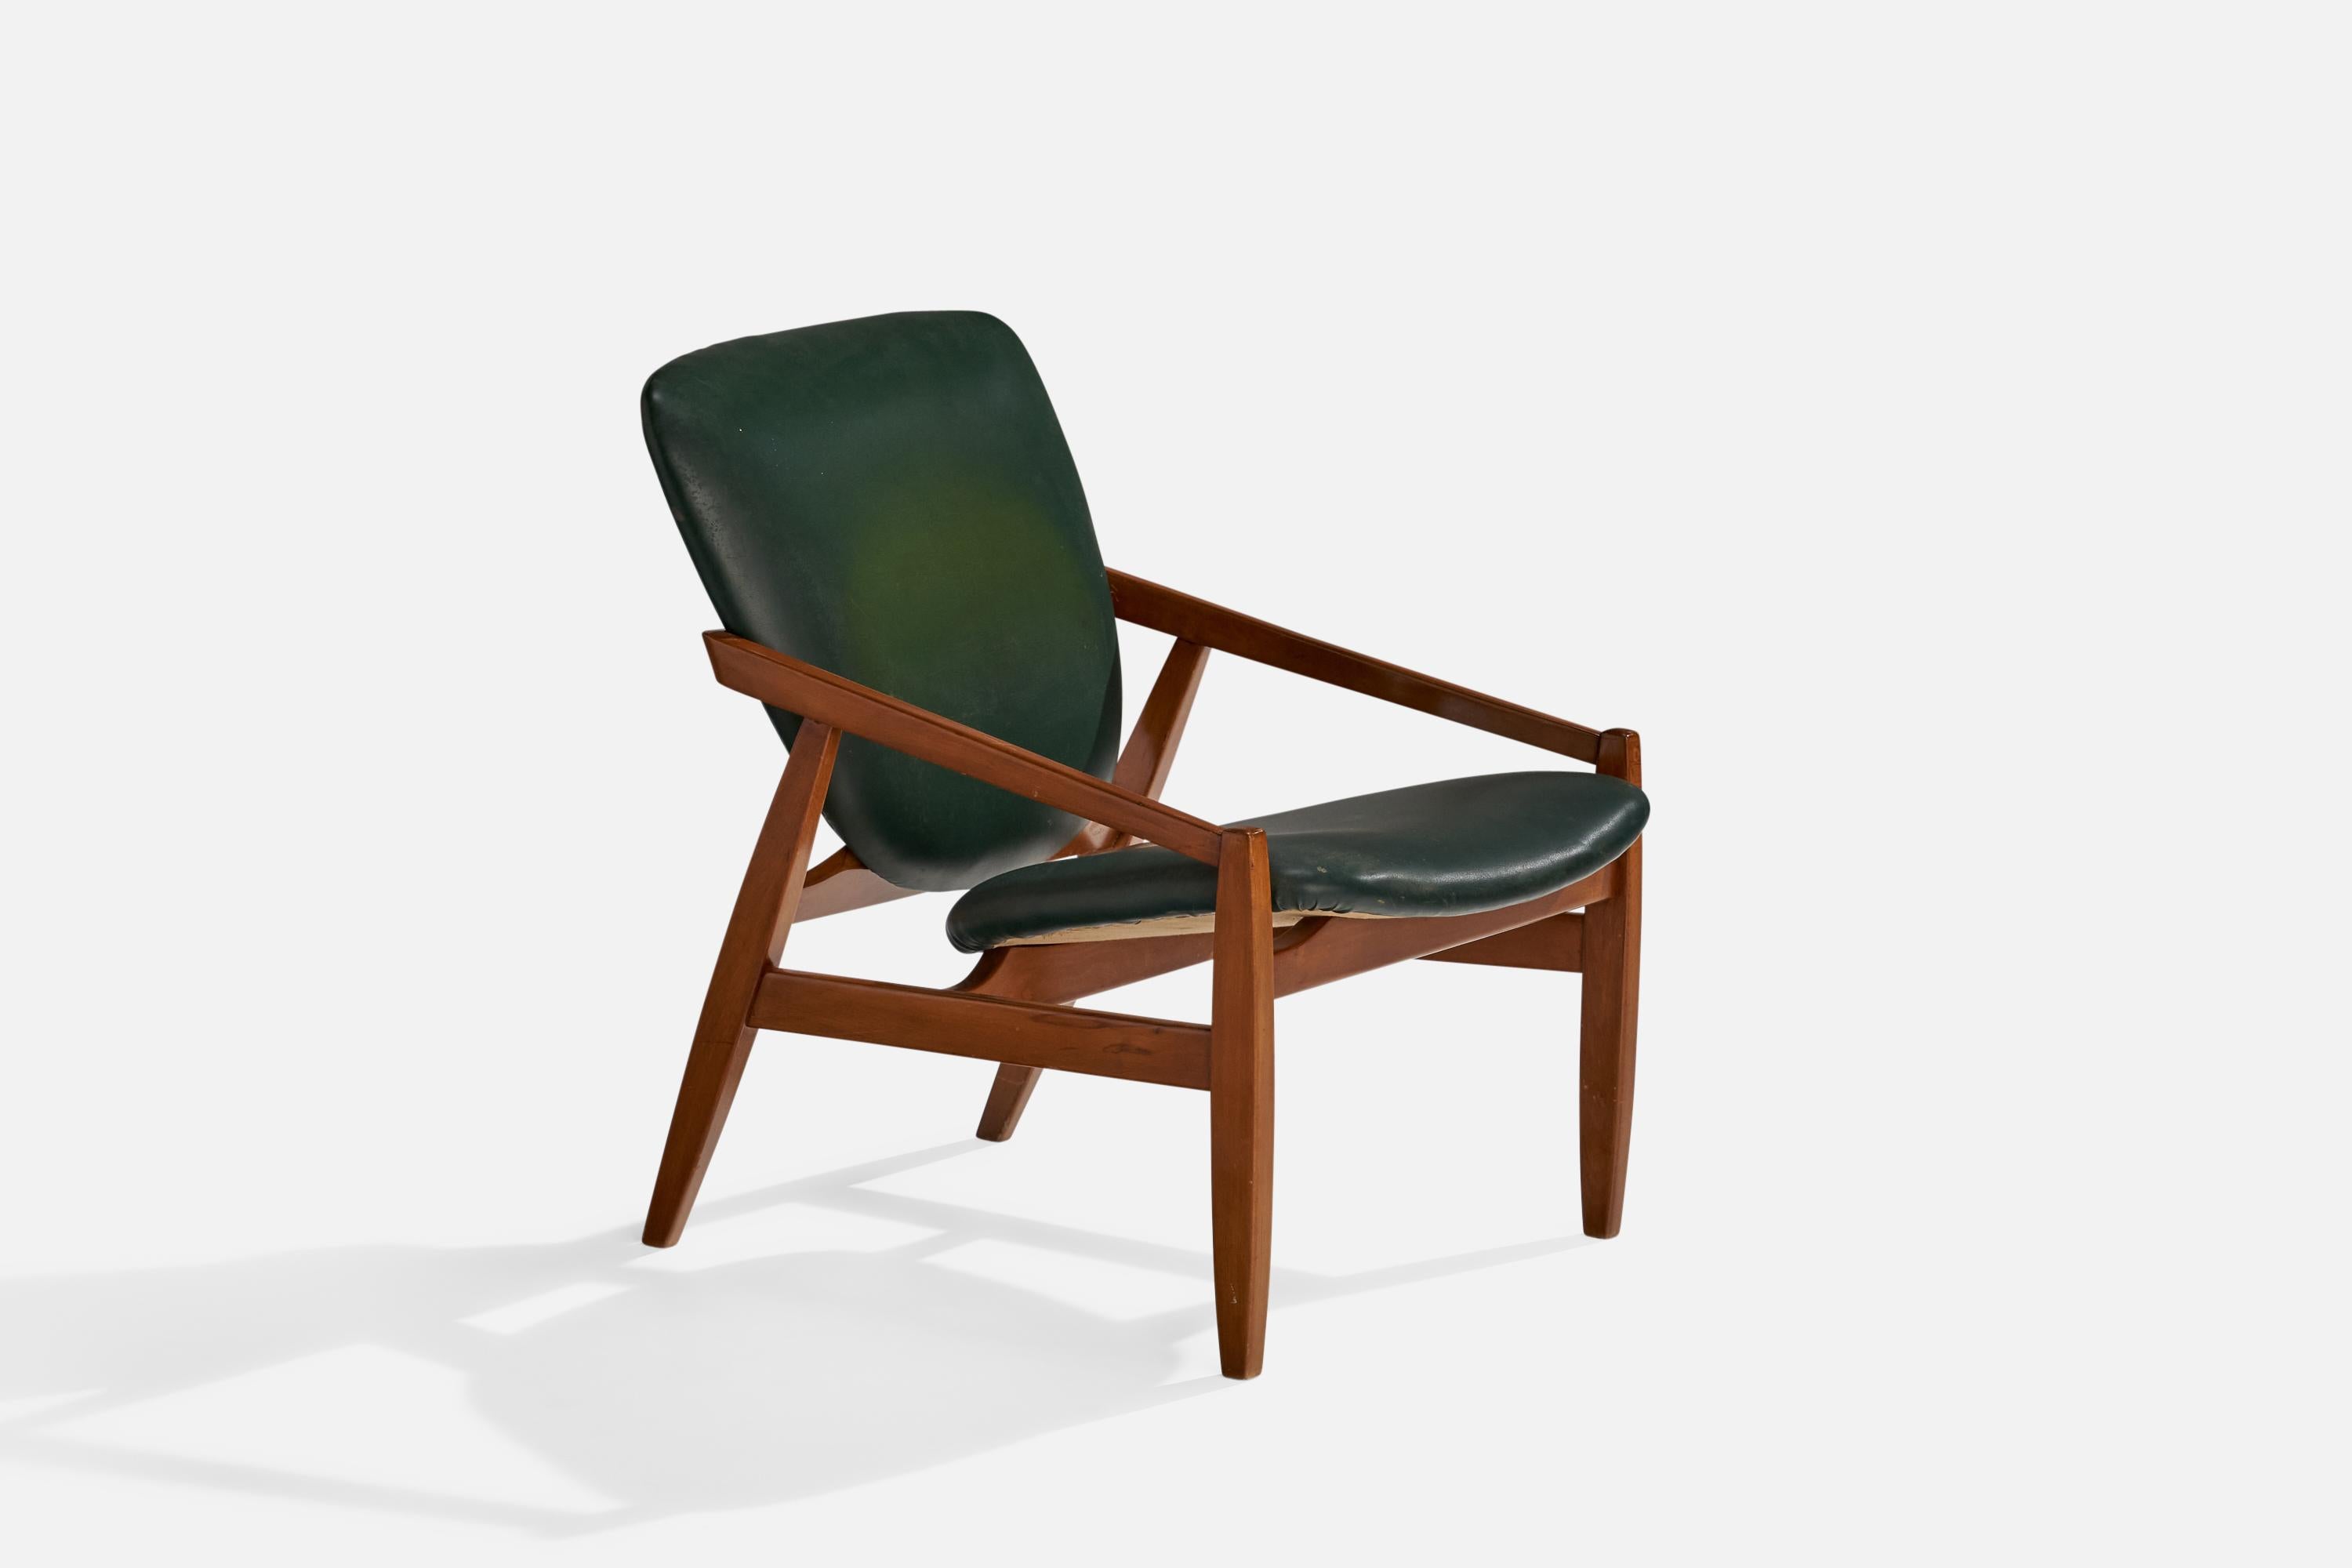 A teak and green vinyl lounge chair designed and produced in Italy, 1960s.

Seat height 15.5”.